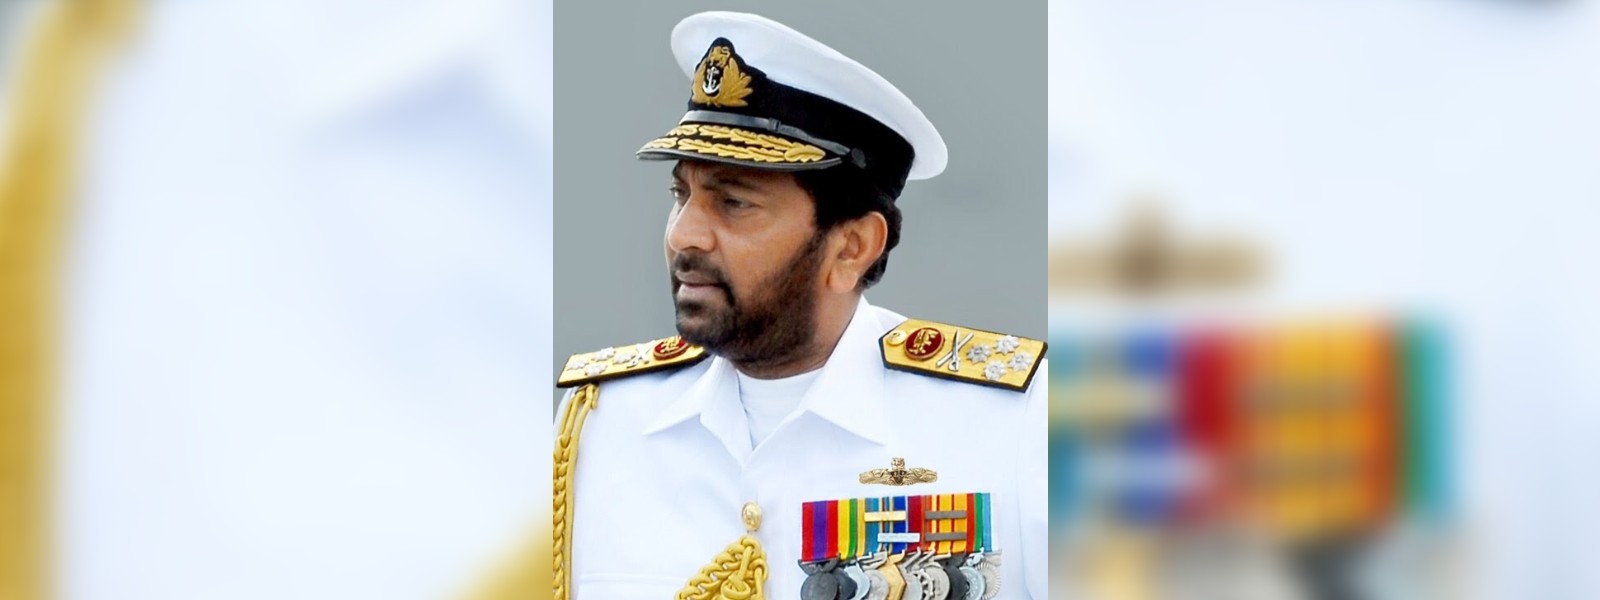 Summons issued for the 04th time on Admiral of the Fleet Wasantha Karannagoda